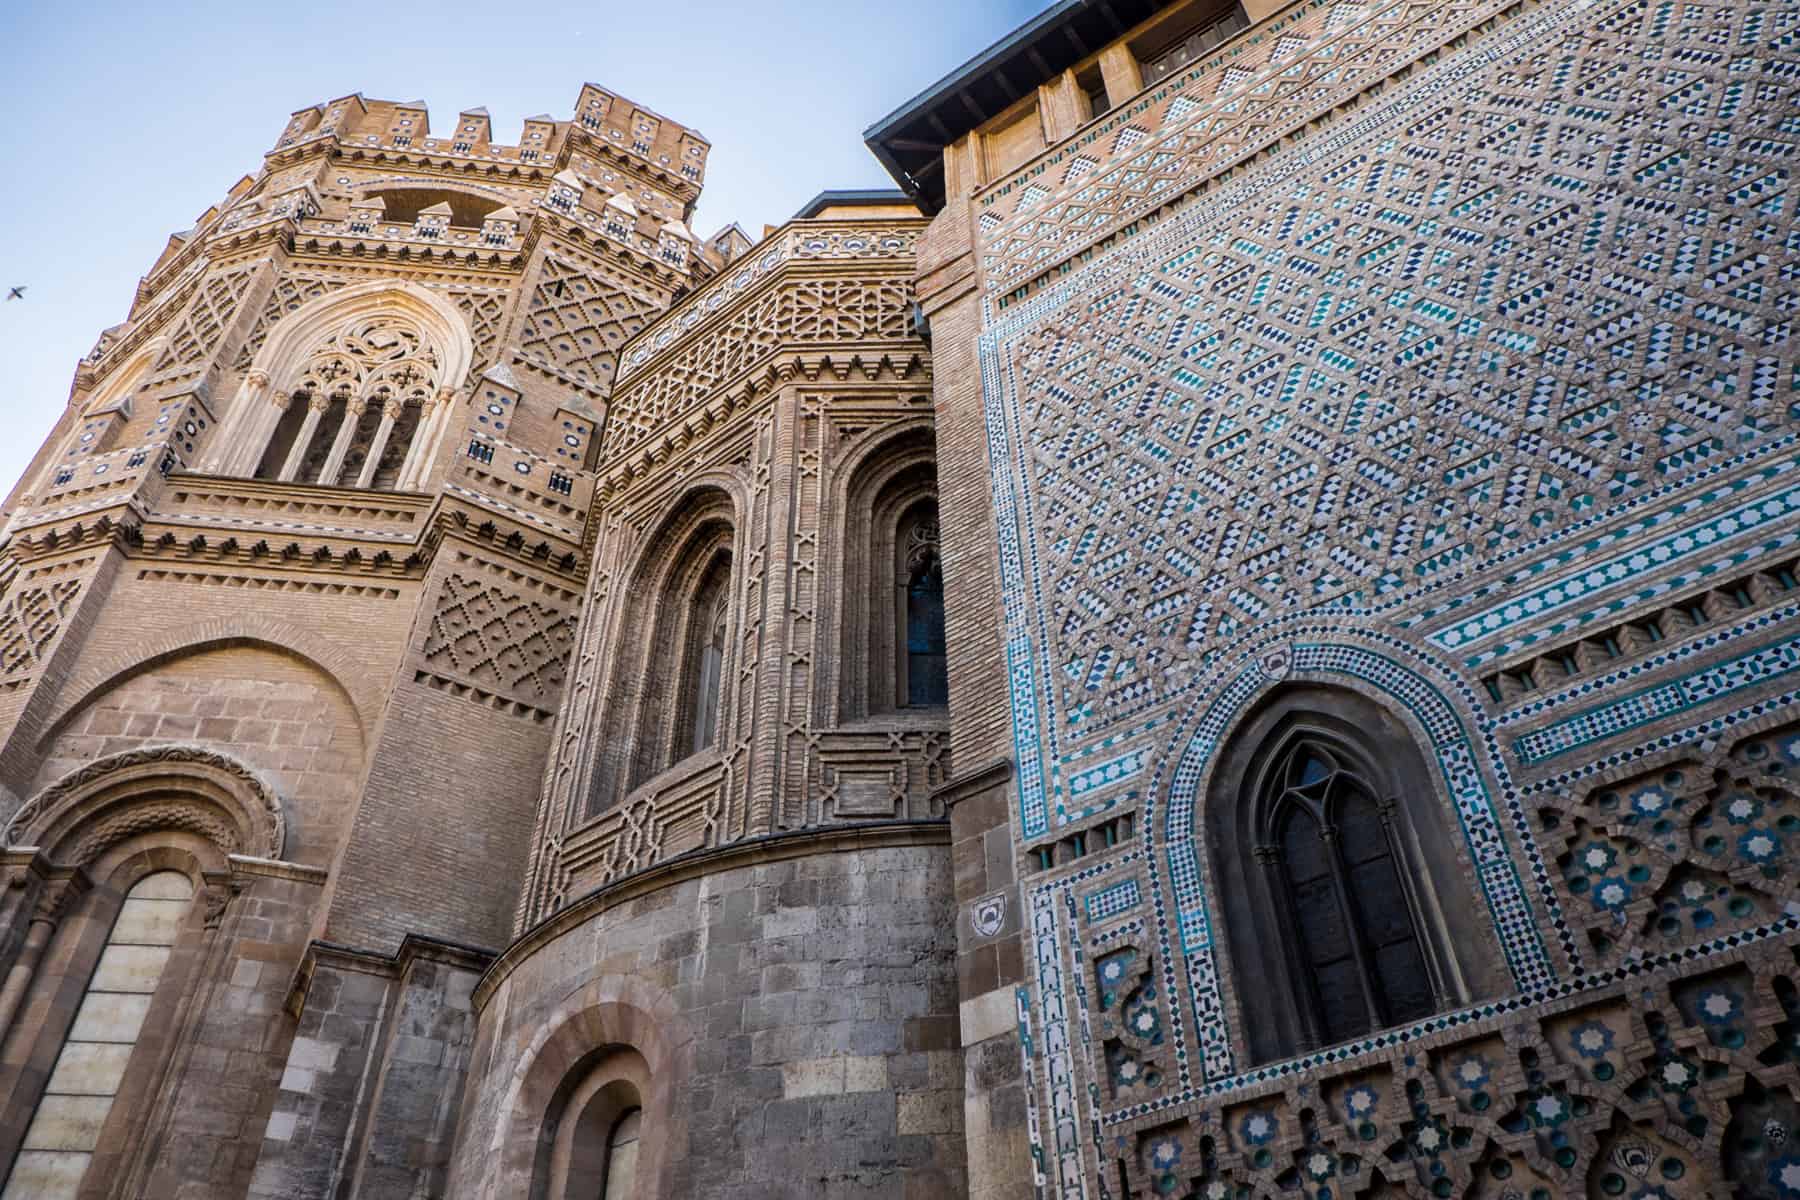 The intricate, patterned bright blue and golden tiles and carvings on the exterior of some historical buildings in Zaragoza, Spain. 